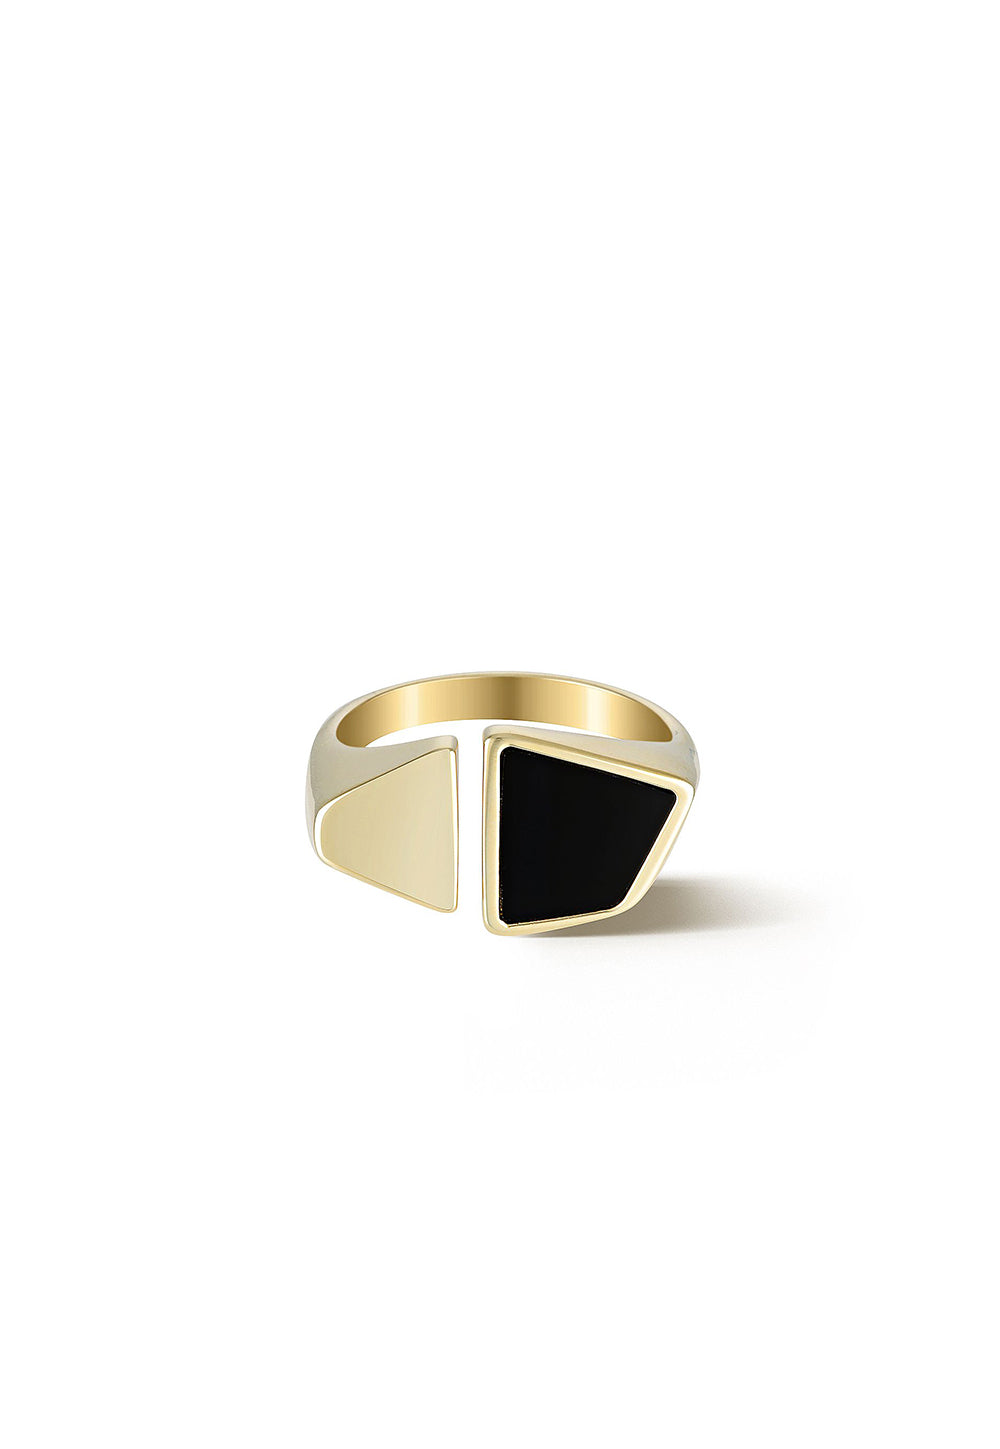 The Aiya Ring sold by Angel Divine